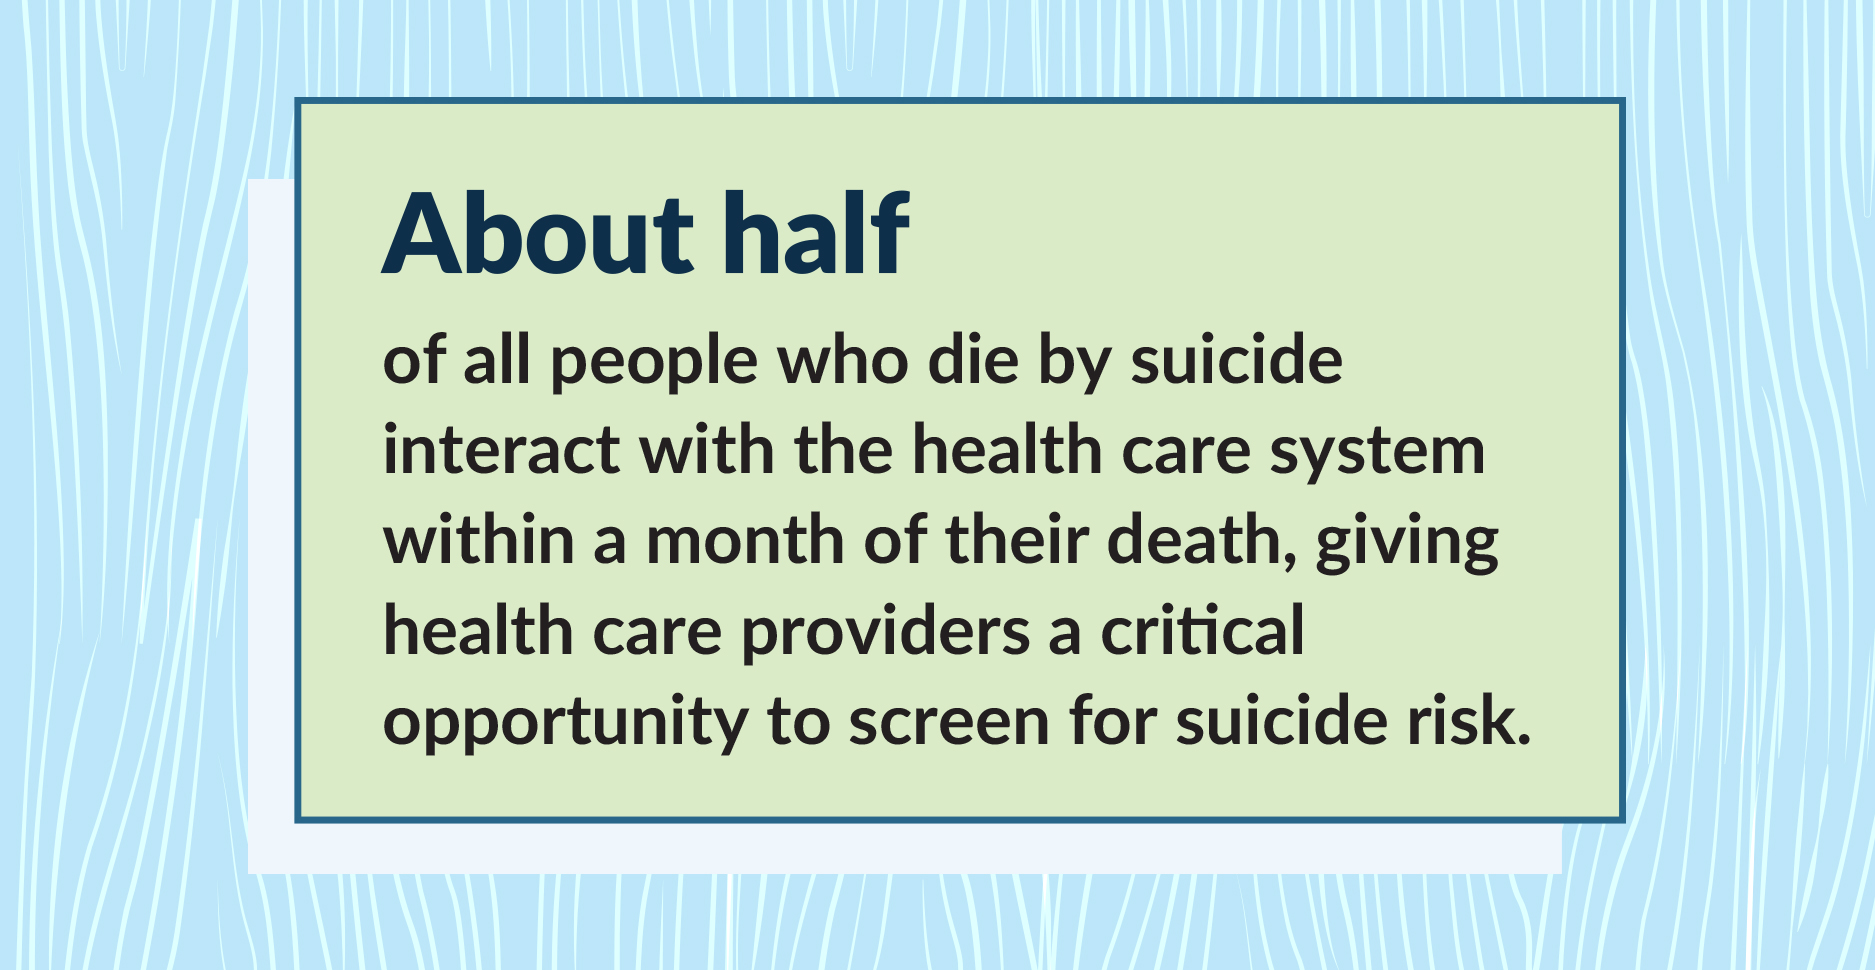 About half of all people who die by suicide interact with the health care system within a month of their death, giving health care providers a critical opportunity to screen for suicide.